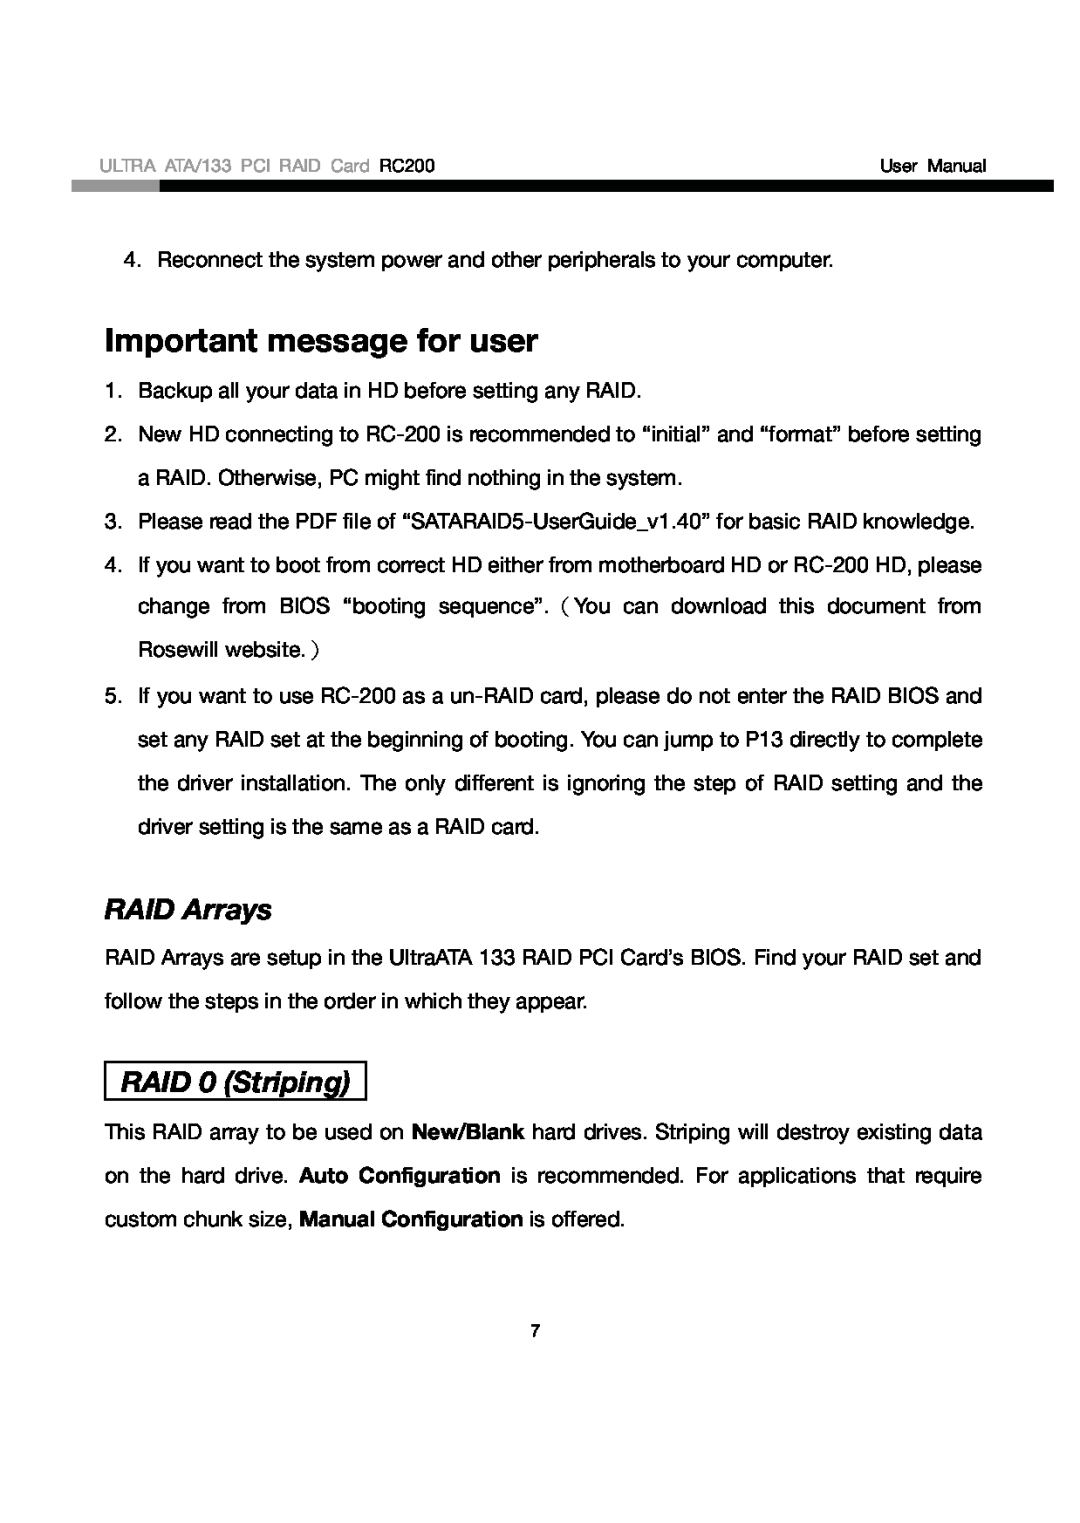 Rosewill RC200 user manual Important message for user, RAID Arrays, RAID 0 Striping 